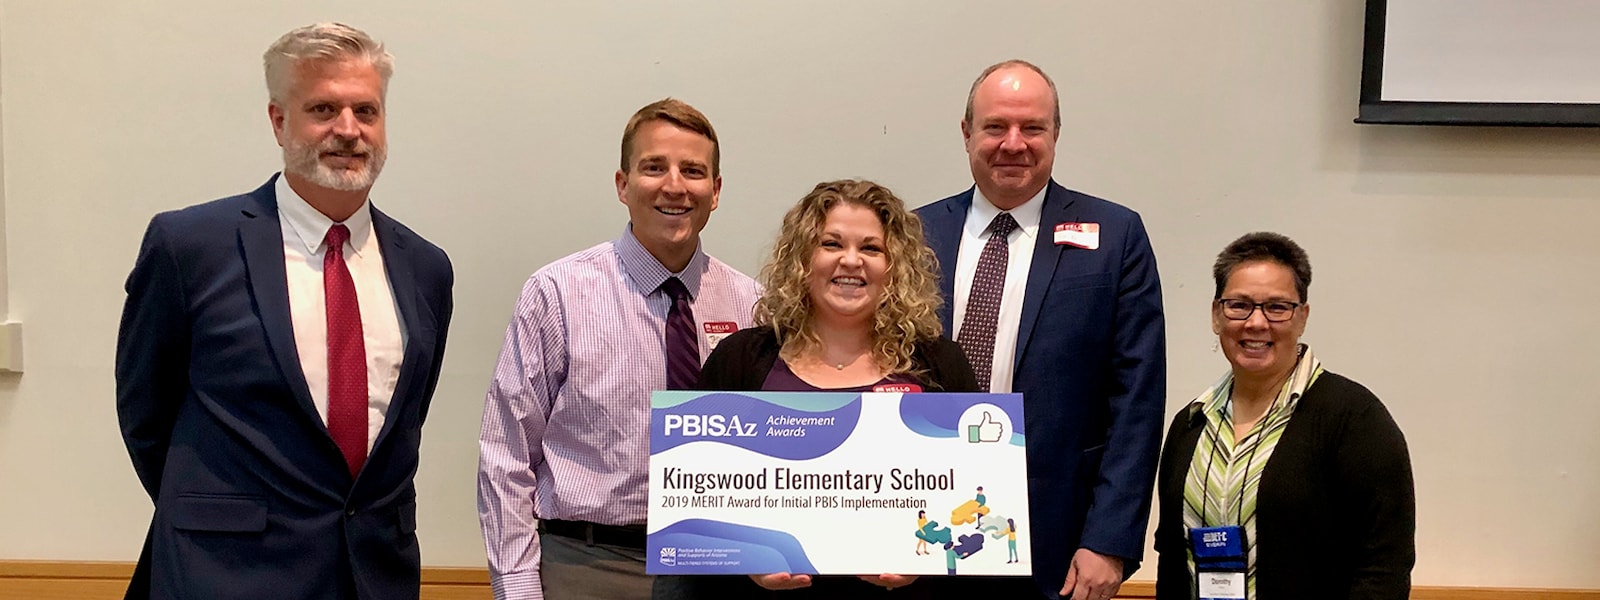 Dr. Kellis and Kingswood principal and assistant principal pose with a Merit Achievement Award from the Positive Behavior Intervention and Supports (PBIS).